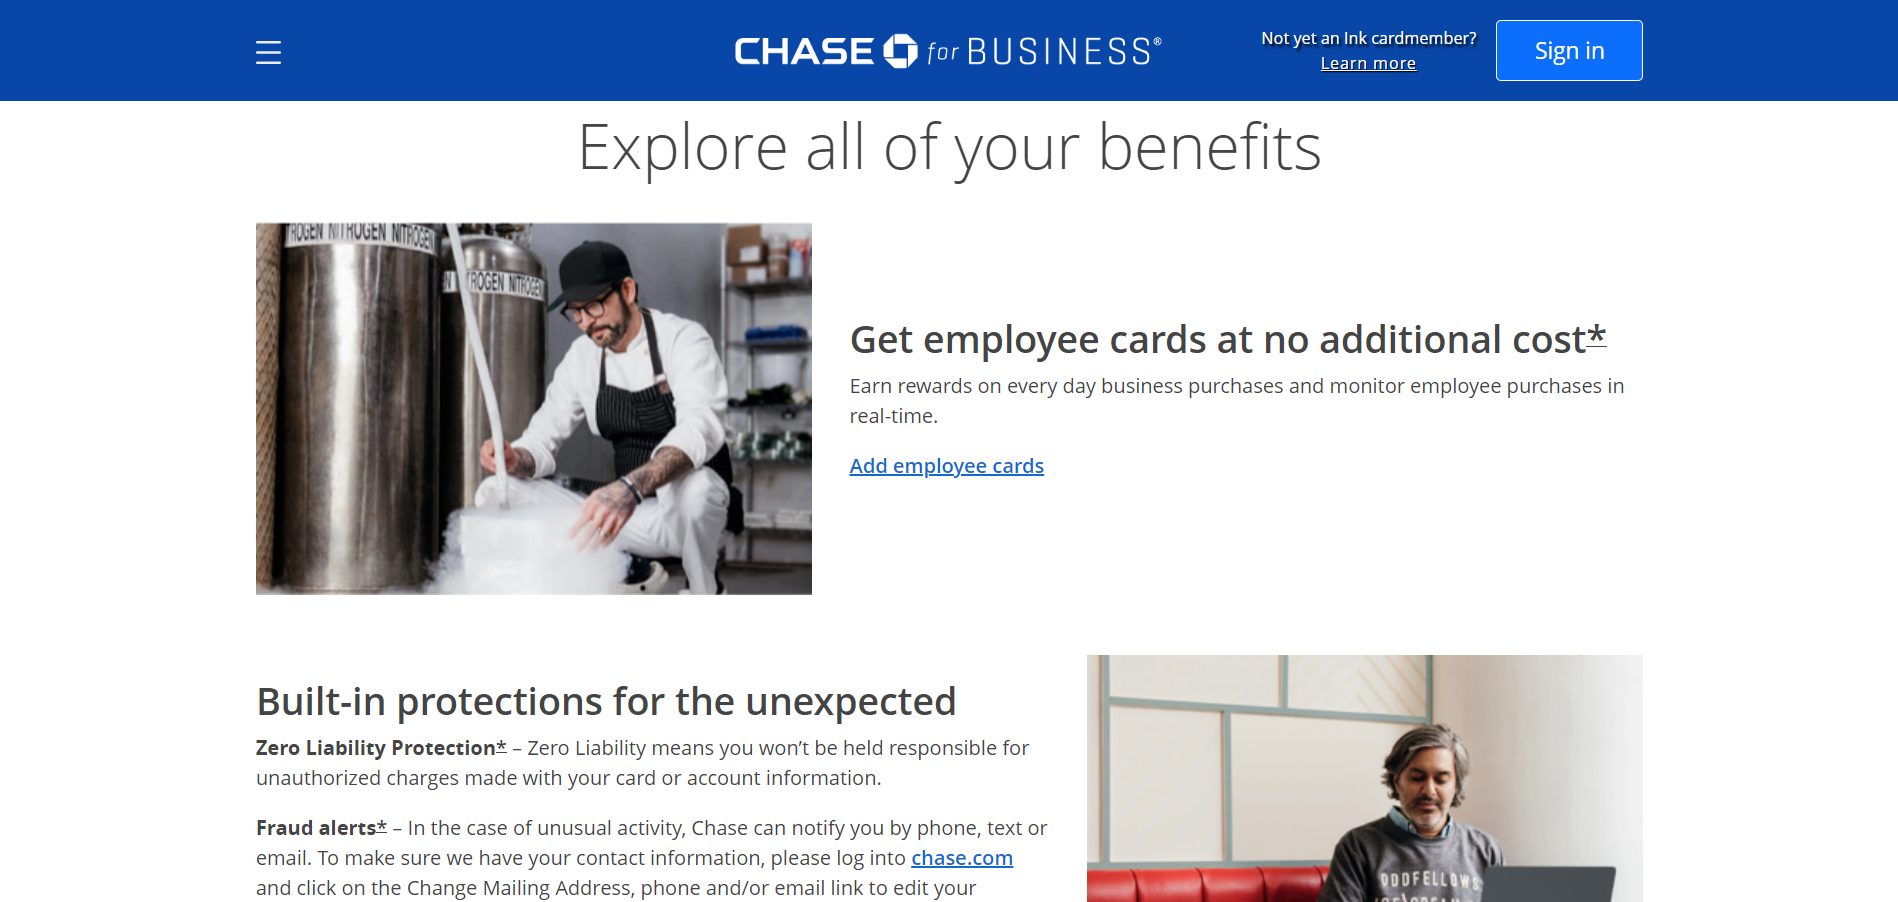 Chase Ink Business Unlimited